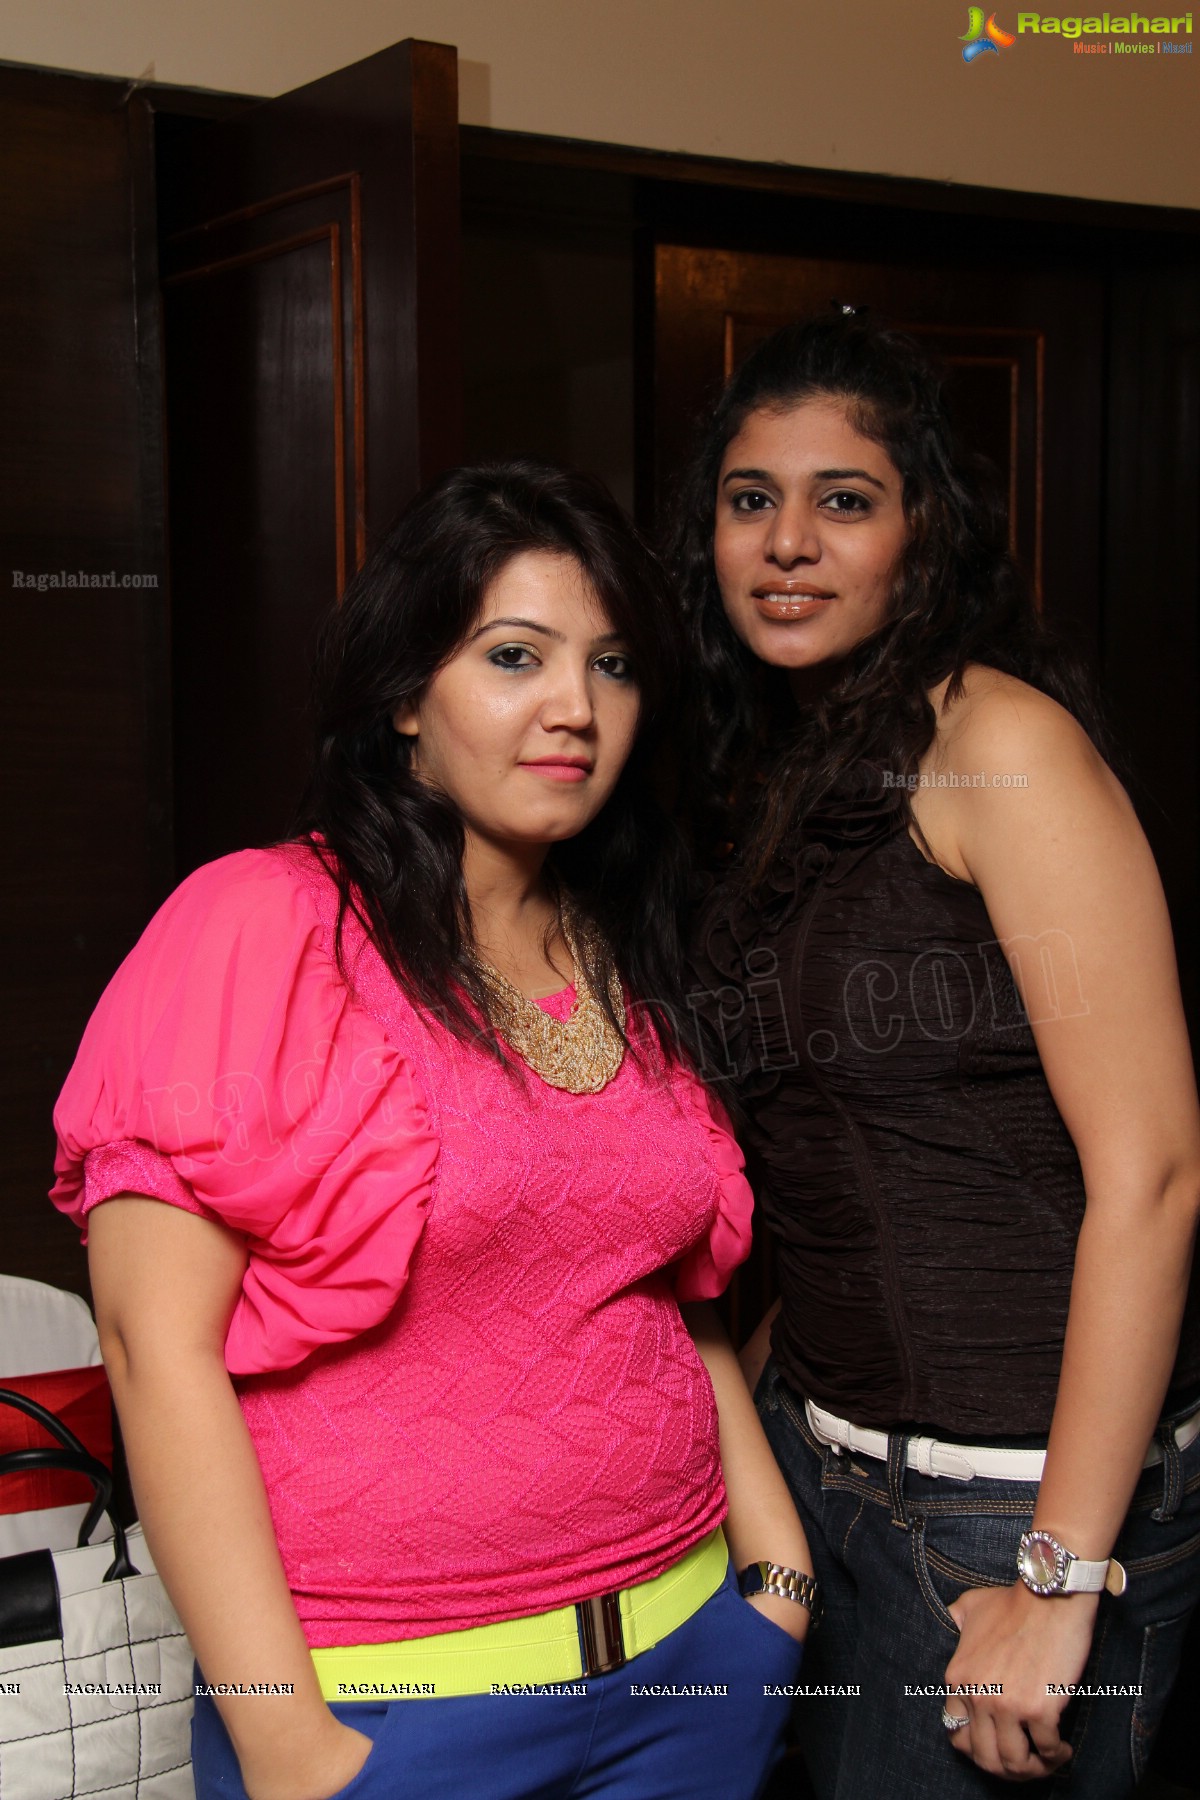 Gorgeous Girls Club Karaoke Event by Shikha and Sonia at Metro Hall, Hyderabad